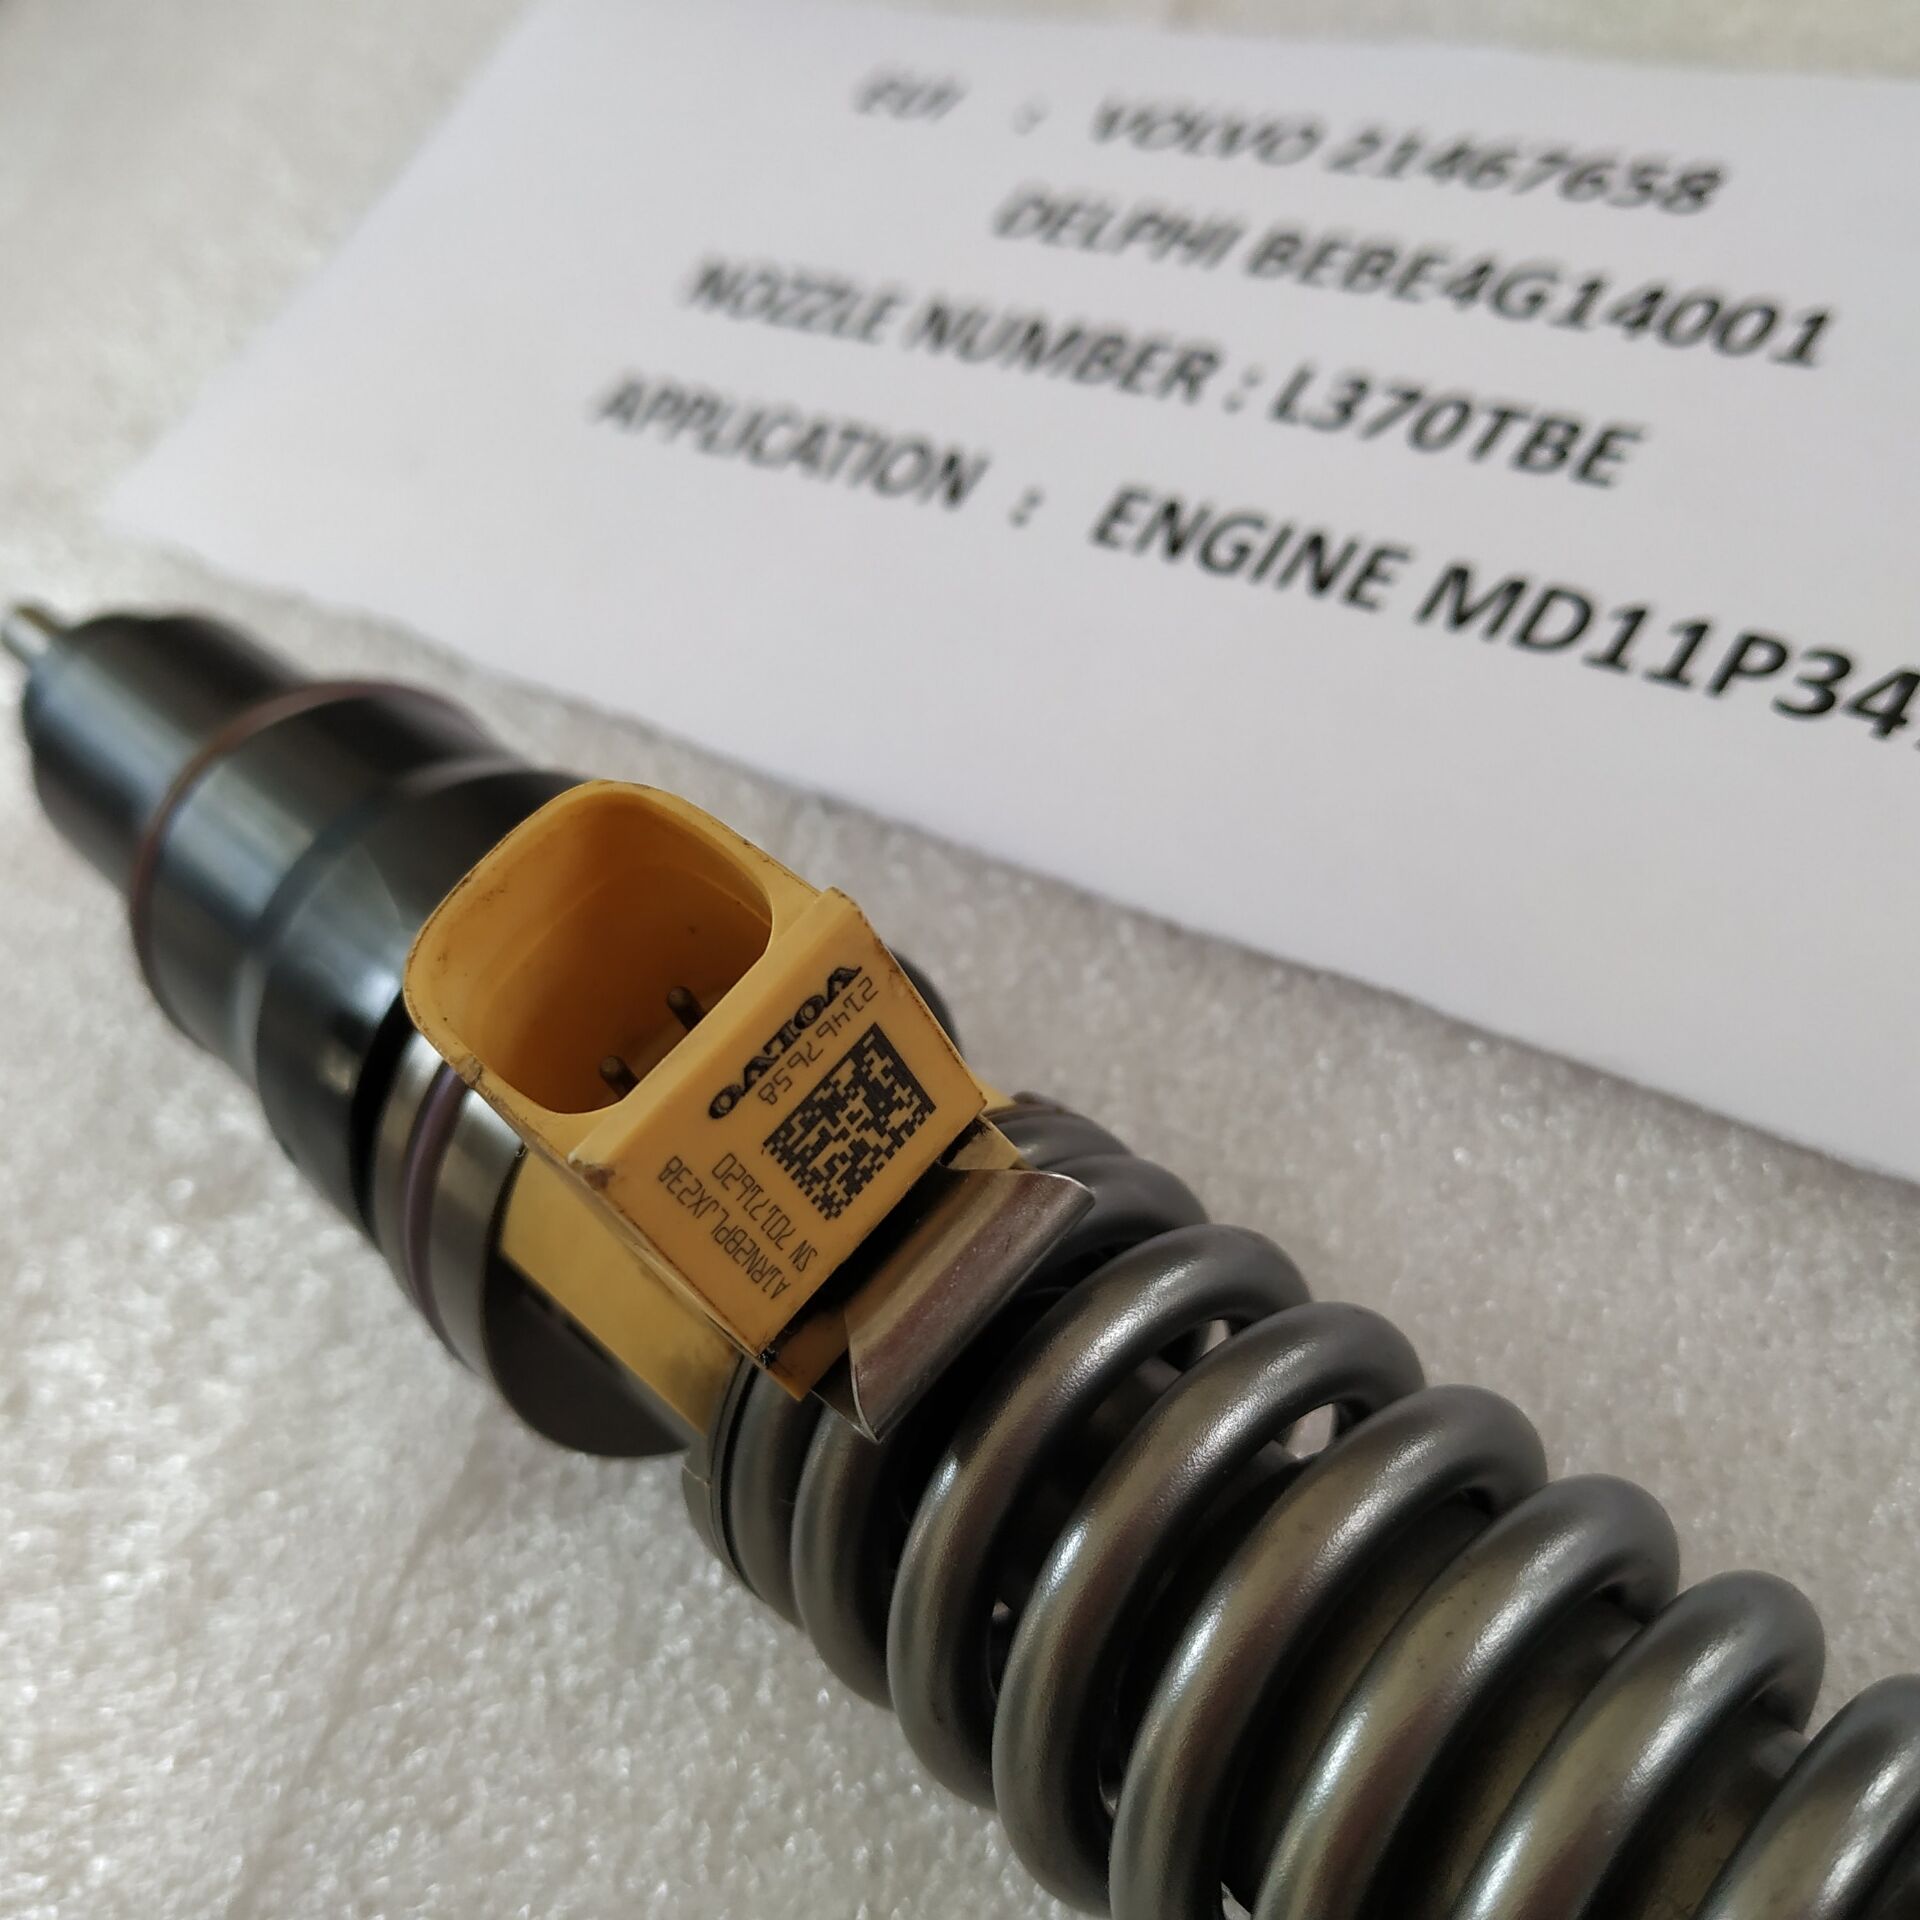 VOLVO EUI Injector 21467658 BEBE4G14001 For Engine MD11P3472